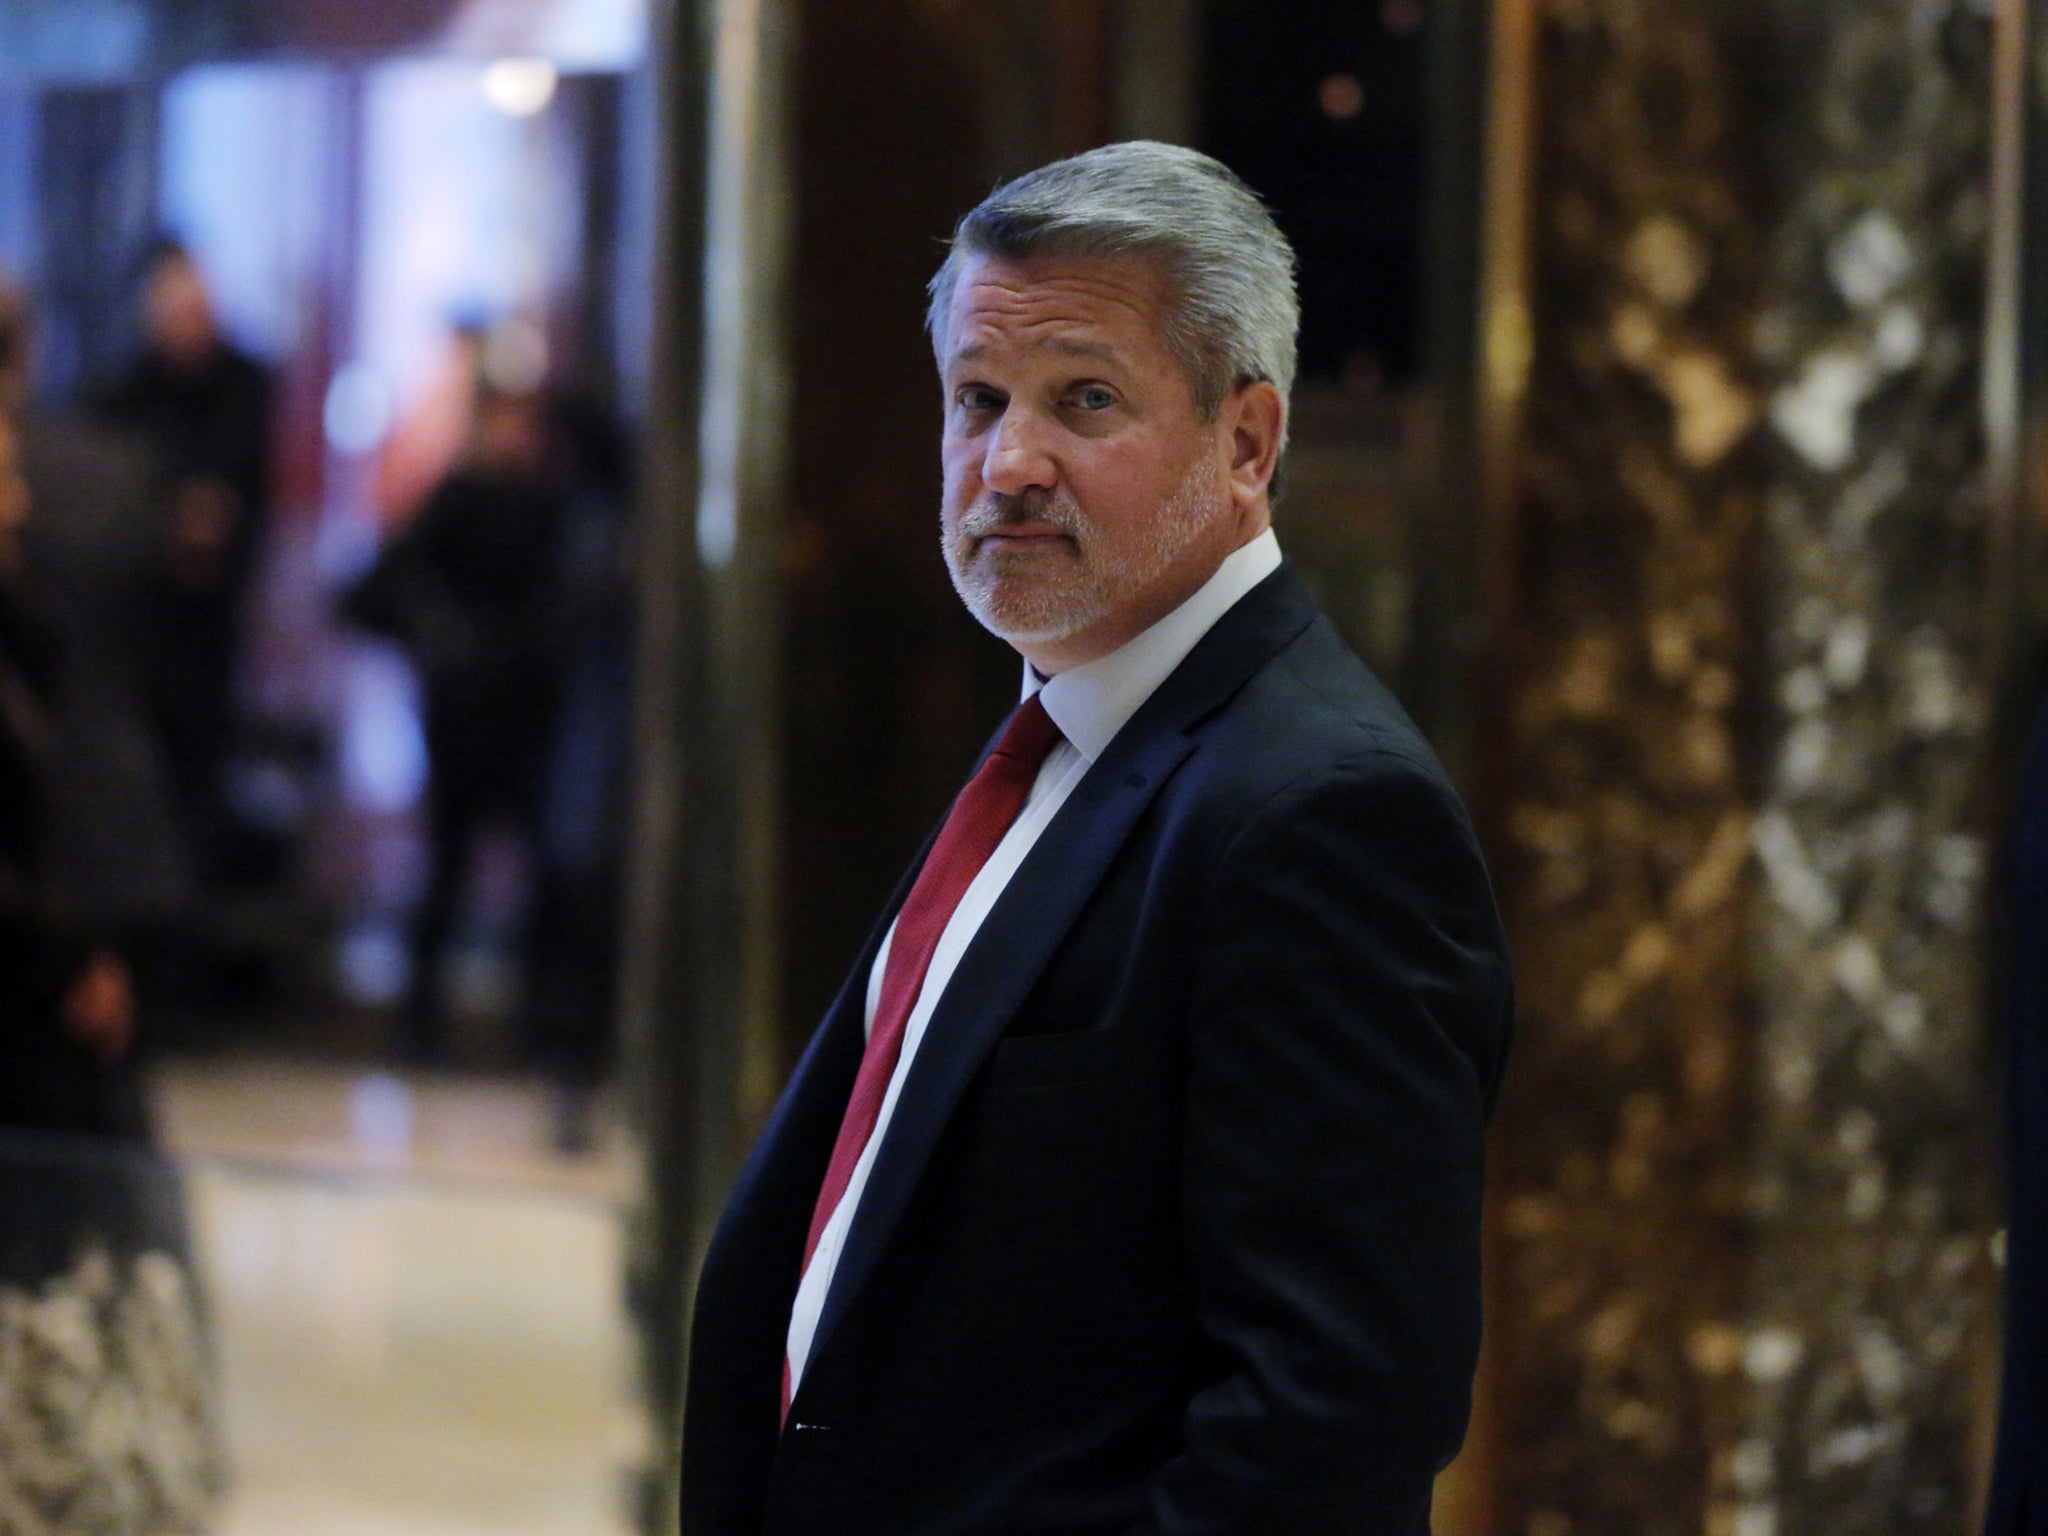 Bill Shine, an Ailes loyalist, was named co-president of Fox News after Mr. Ailes was forced out